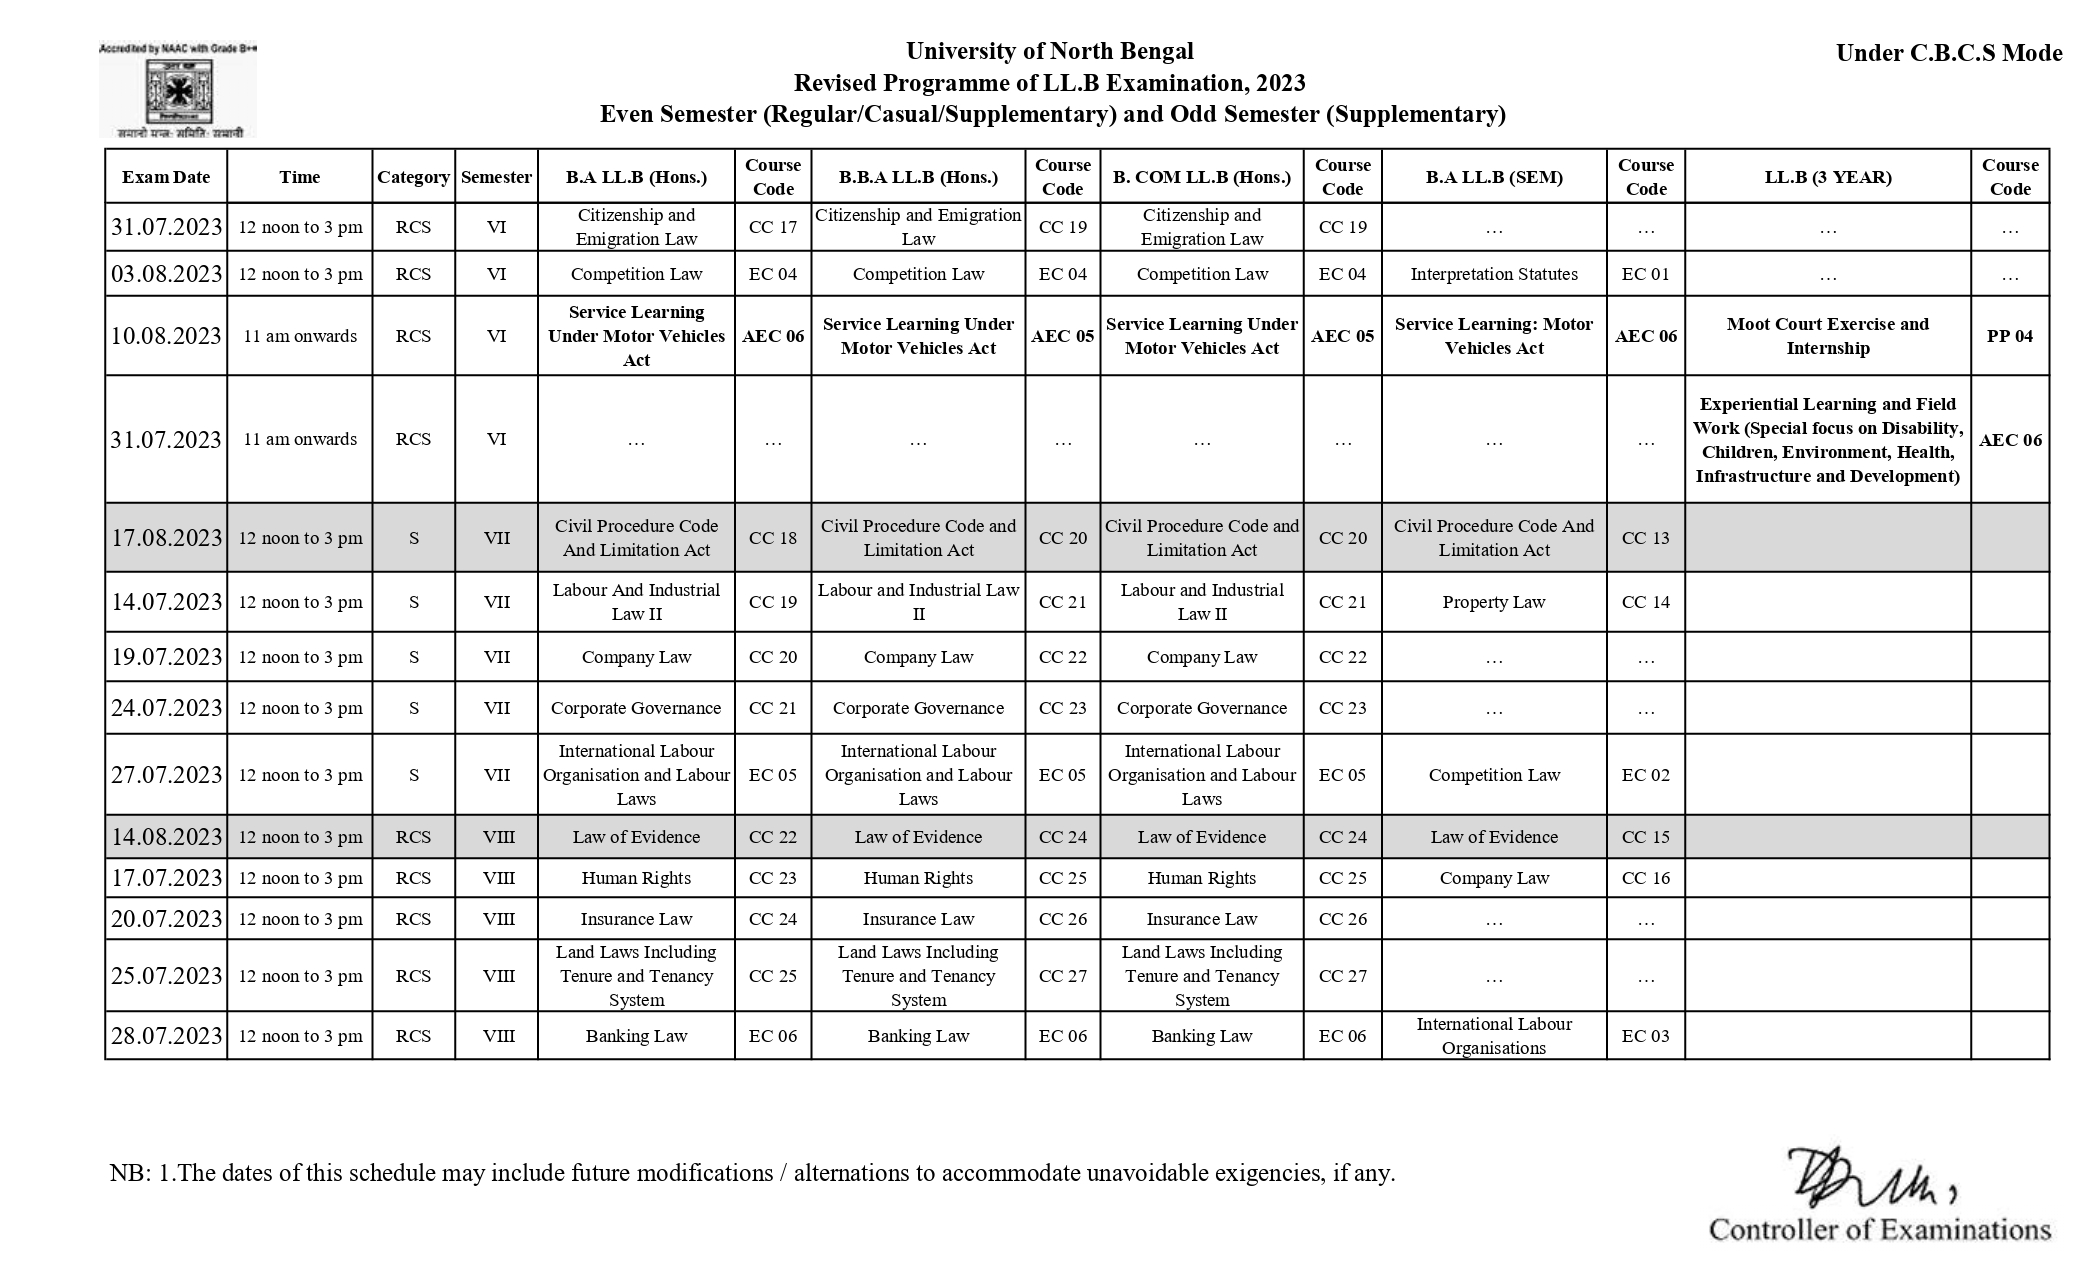 Revised Examination Schedule July 2023 (CBCS) Page 3